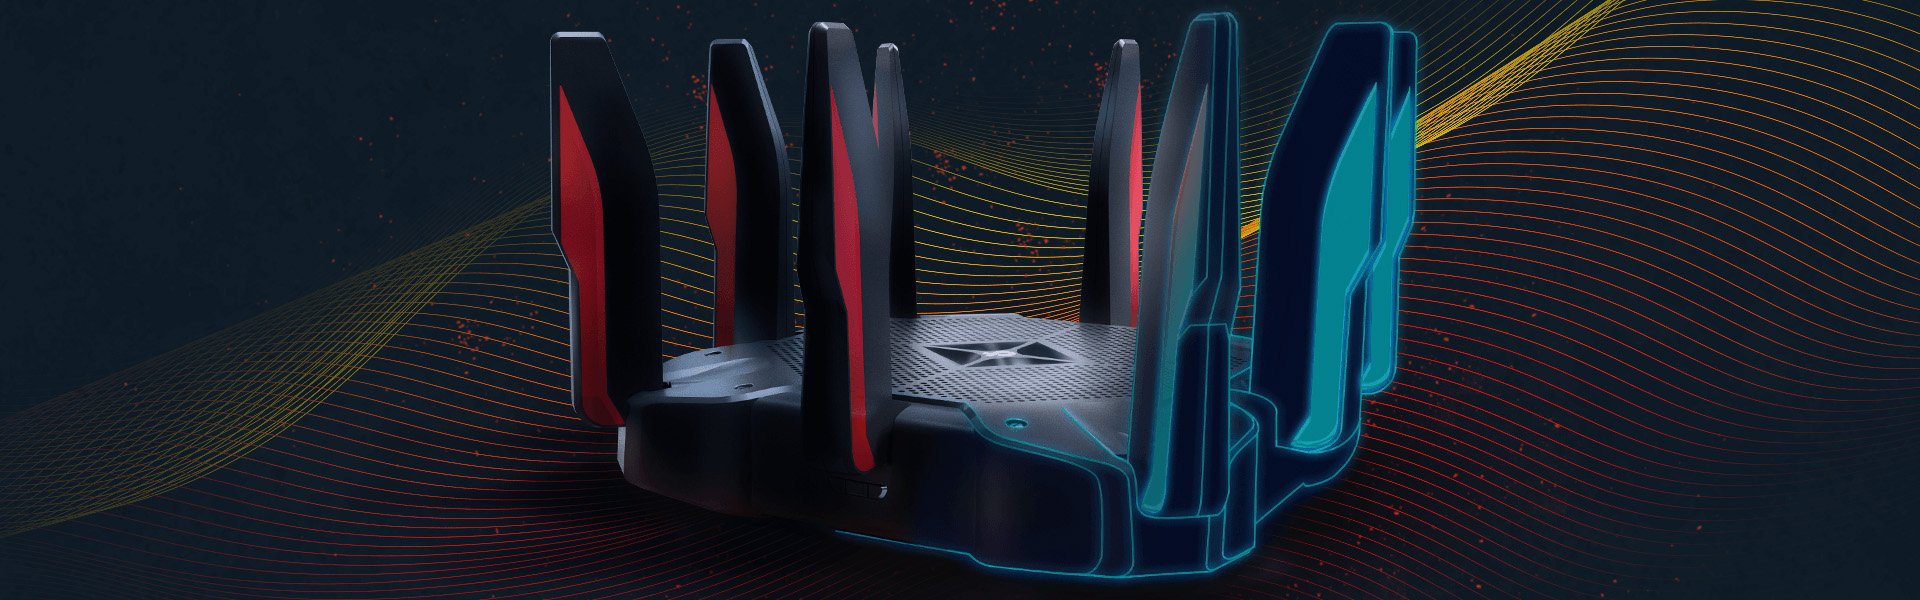 TP-Link Archer C5400x Gaming Router Launches Today 18